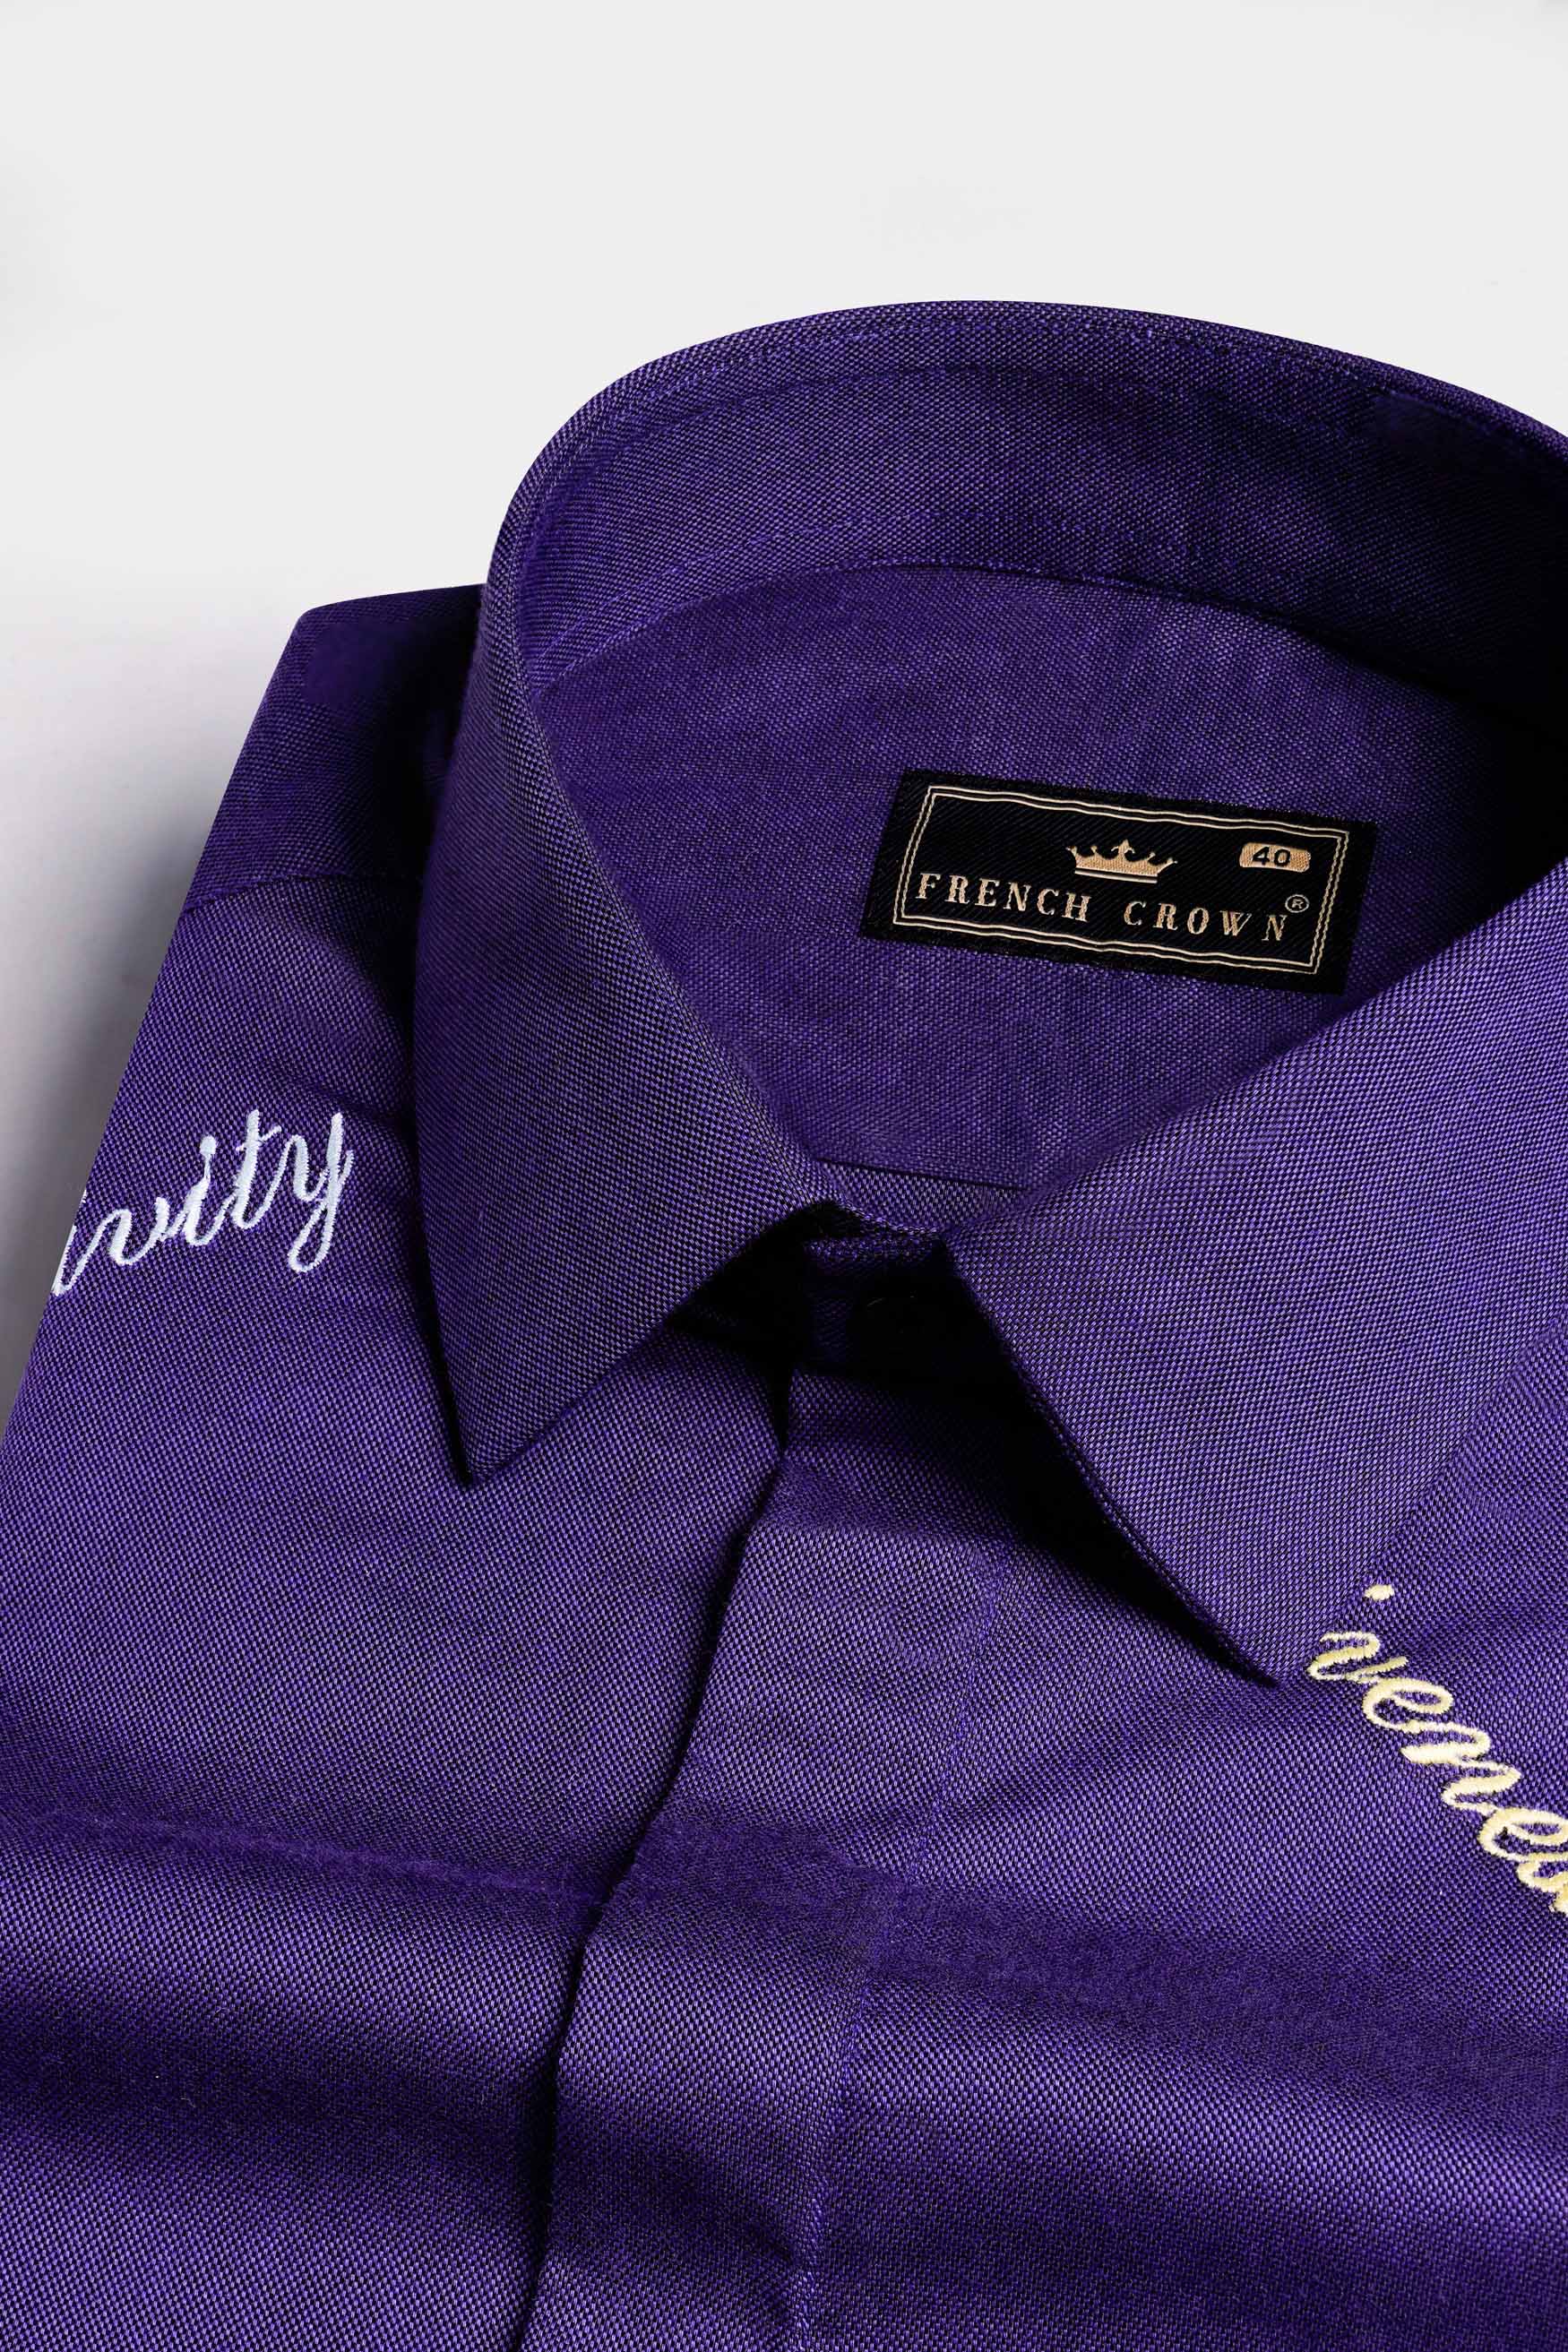 Eminence Purple Embroidered Royal Oxford Designer Shirt 11558-BLK-P782-38, 11558-BLK-P782-H-38, 11558-BLK-P782-39, 11558-BLK-P782-H-39, 11558-BLK-P782-40, 11558-BLK-P782-H-40, 11558-BLK-P782-42, 11558-BLK-P782-H-42, 11558-BLK-P782-44, 11558-BLK-P782-H-44, 11558-BLK-P782-46, 11558-BLK-P782-H-46, 11558-BLK-P782-48, 11558-BLK-P782-H-48, 11558-BLK-P782-50, 11558-BLK-P782-H-50, 11558-BLK-P782-52, 11558-BLK-P782-H-52